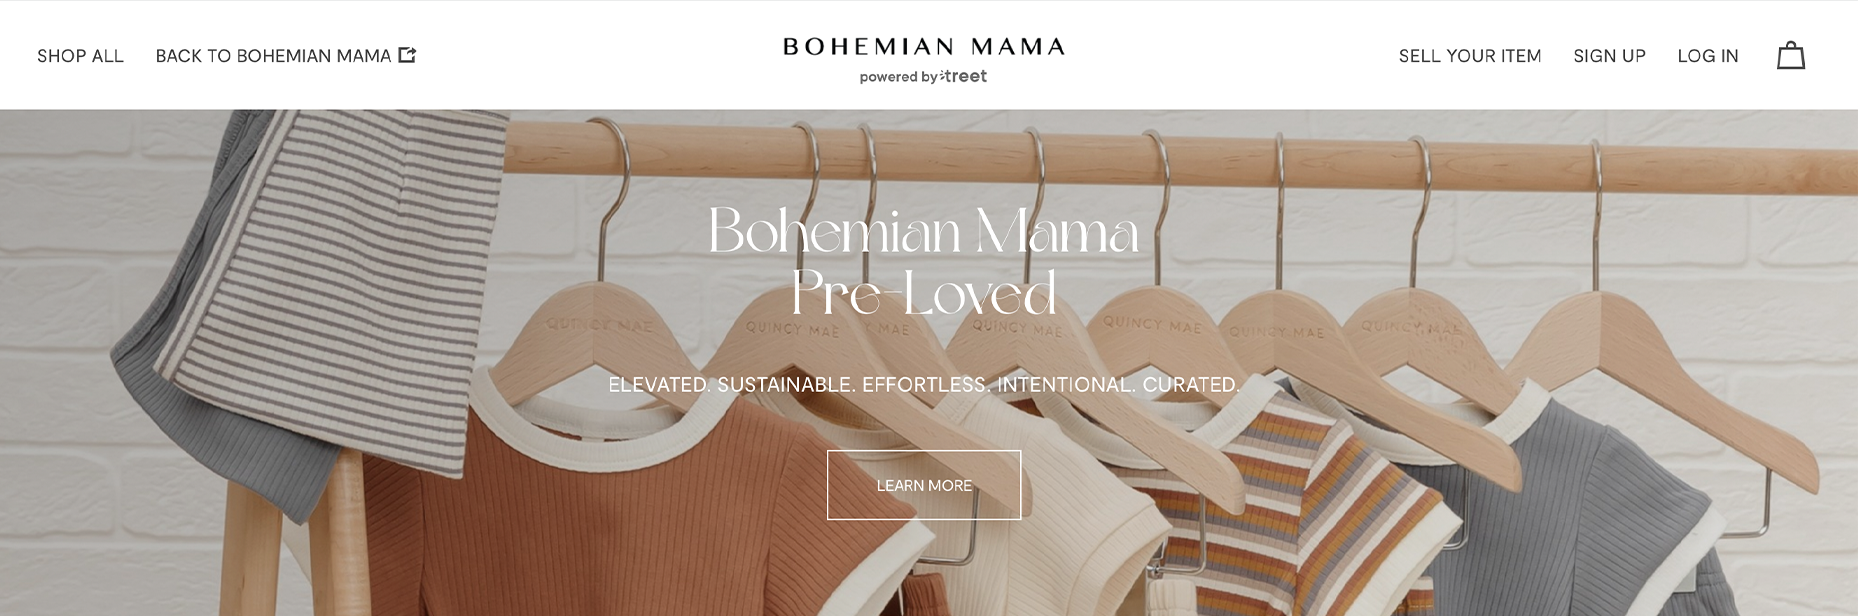 New pre-loved site launch